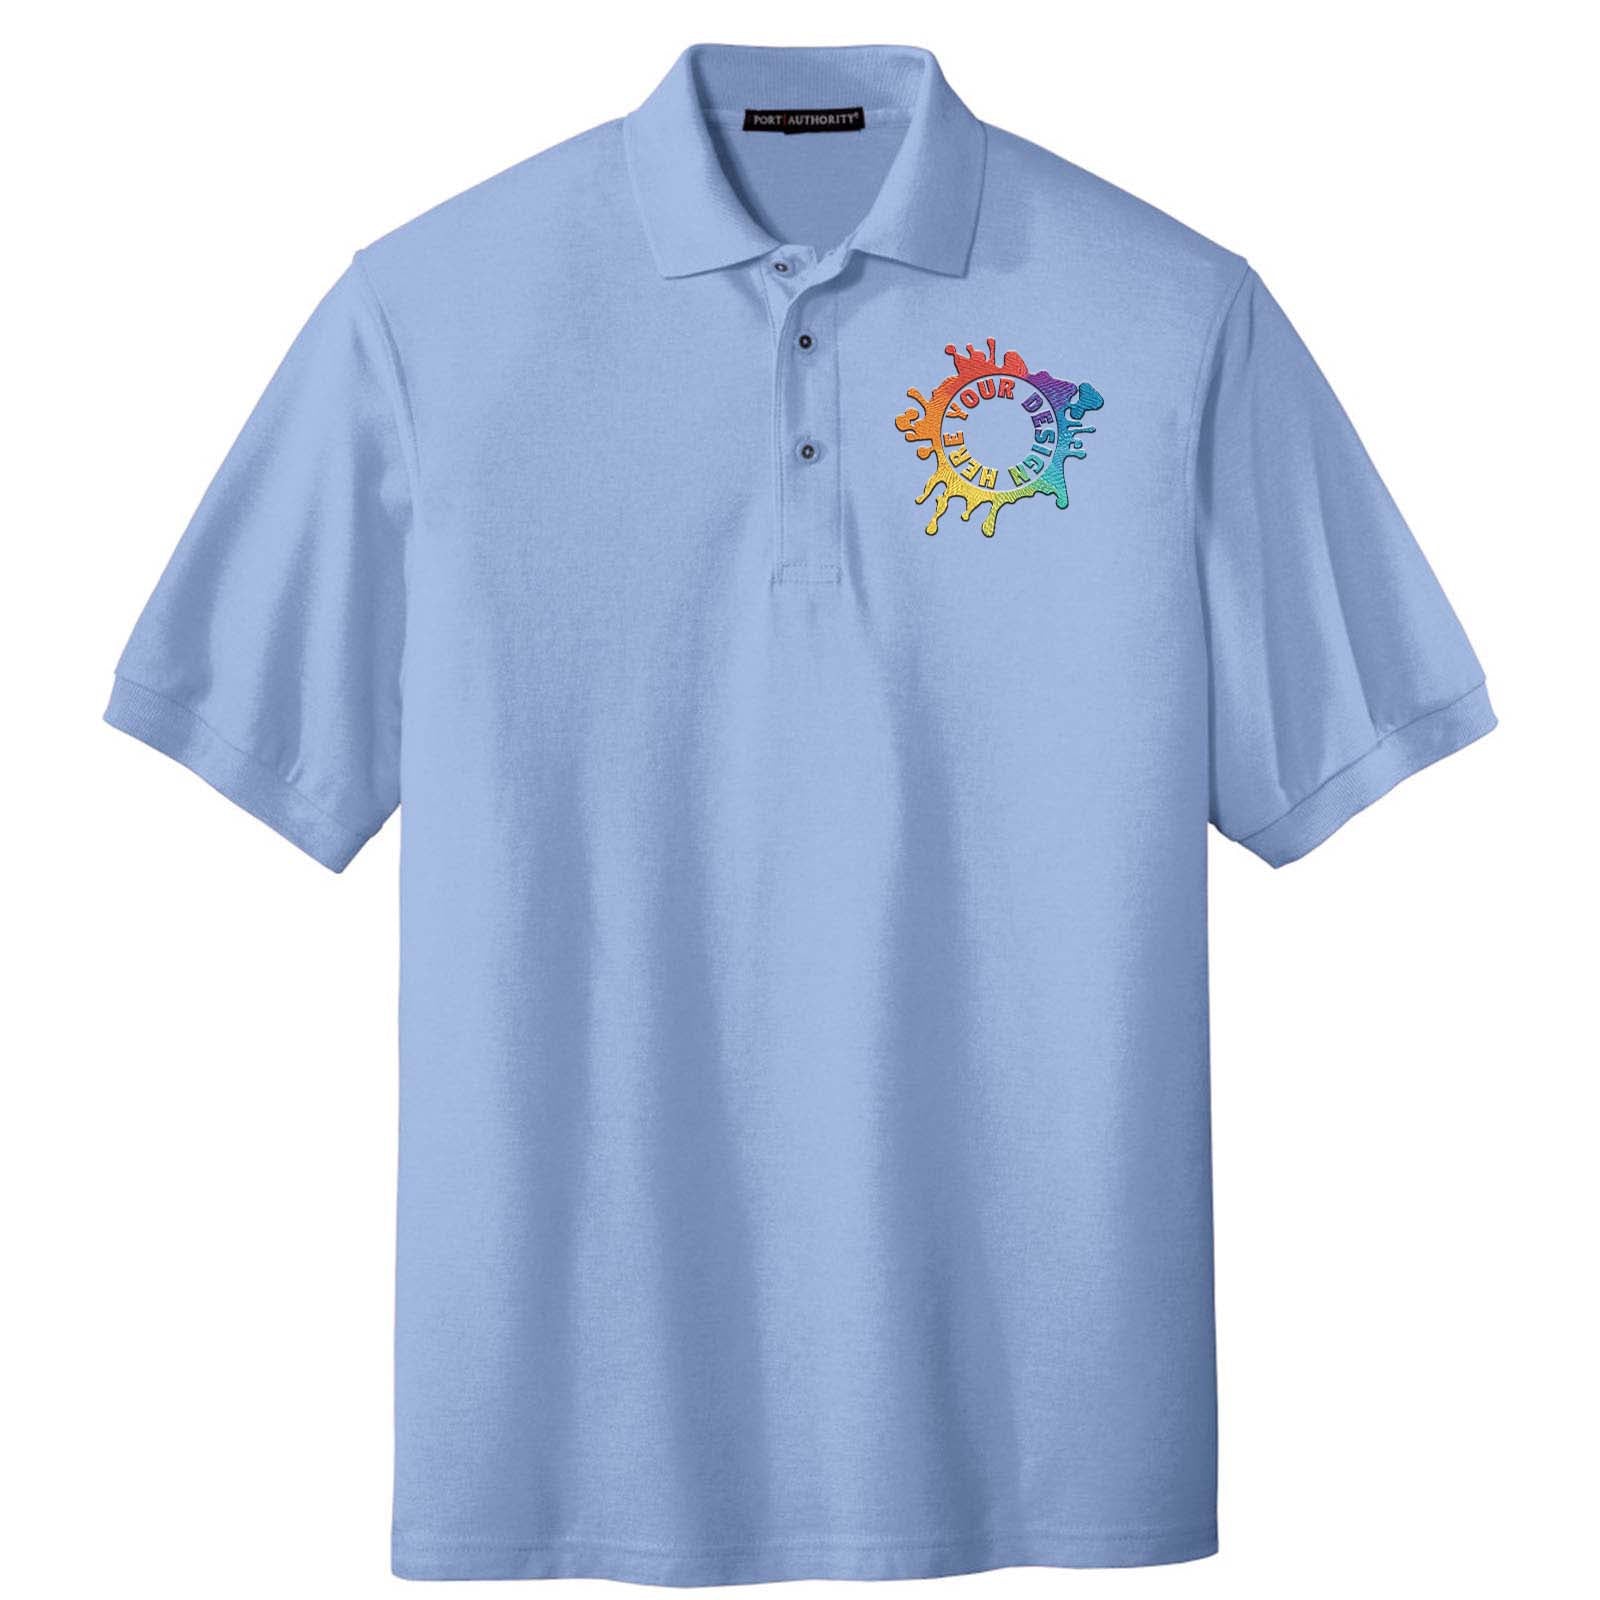 Port Authority Men's Silk Touch Polyester/Cotton Blend Polo T-Shirt Embroidery - Mato & Hash